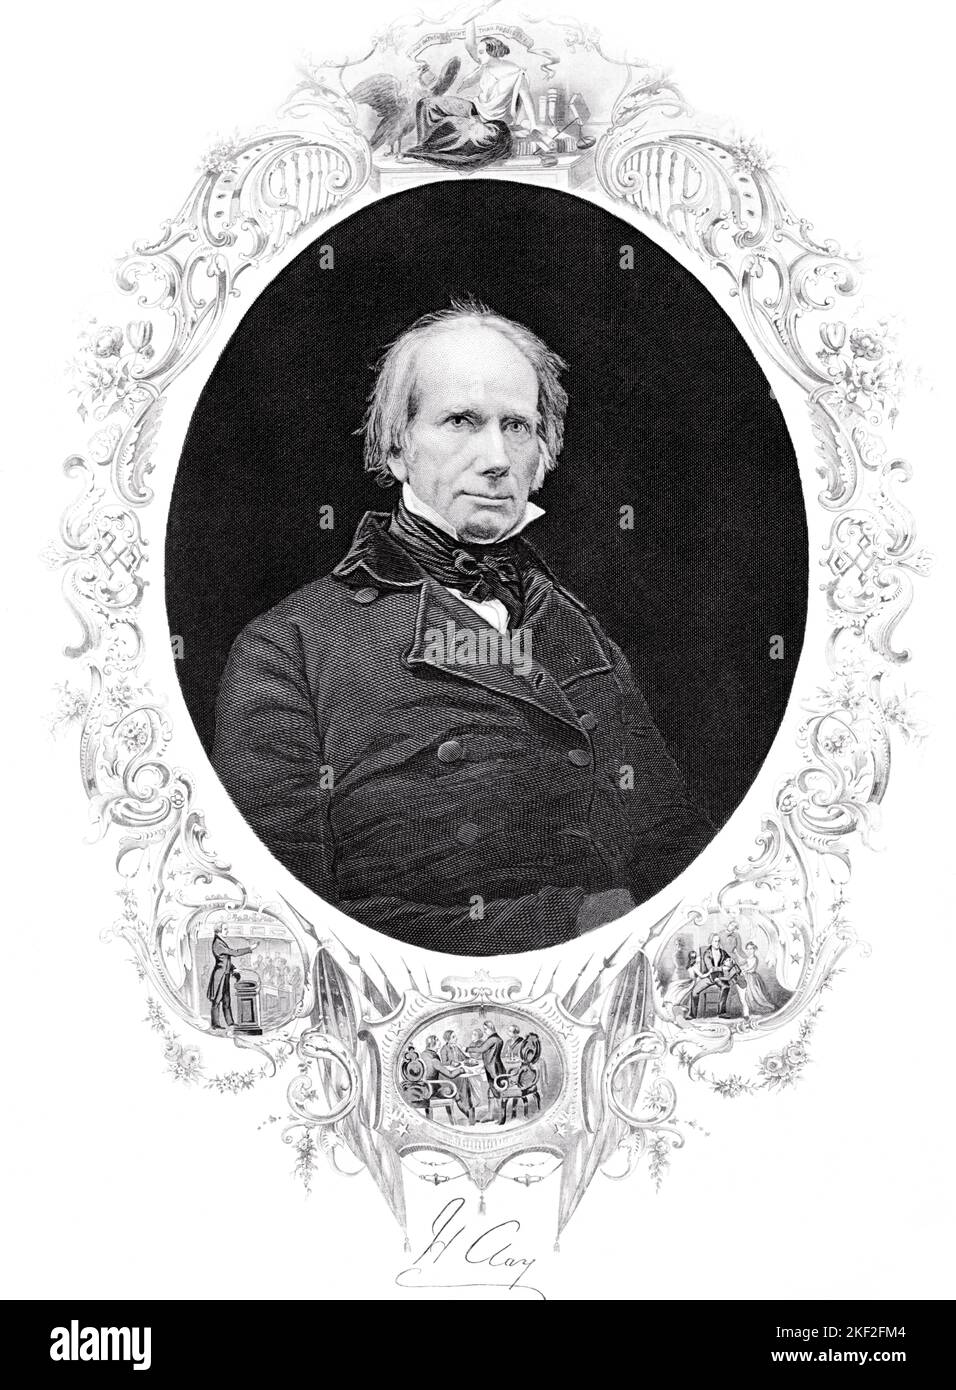 1830s PORTRAIT AMERICAN STATESMAN HENRY CLAY CALLED THE GREAT COMPROMISER SERVED SENATOR & JOHN QUINCY ADAMS’ SECRETARY OF STATE - q51038 CPC001 HARS LEADERSHIP POWERFUL SENATE WHIG OCCUPATIONS POLITICS SERVED KENTUCKY KY HELPED QUINCY SECRETARY OF STATE 1830s ATTORNEY CONGRESSMAN REPRESENTED STATESMAN BLACK AND WHITE HENRY OLD FASHIONED SENATOR Stock Photo